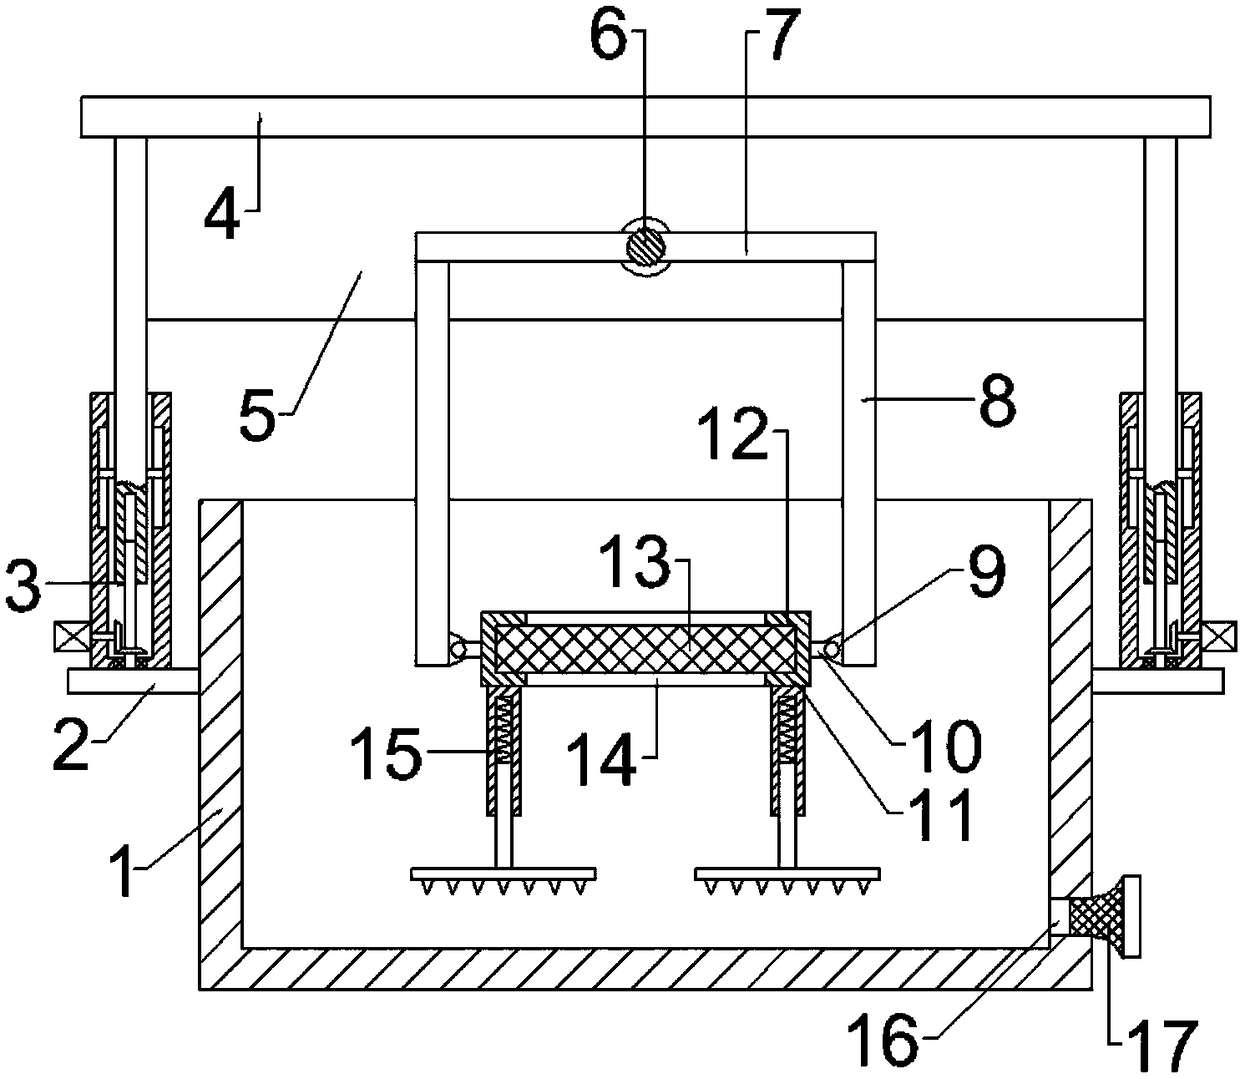 Paper-making equipment with paper curtain shaking function